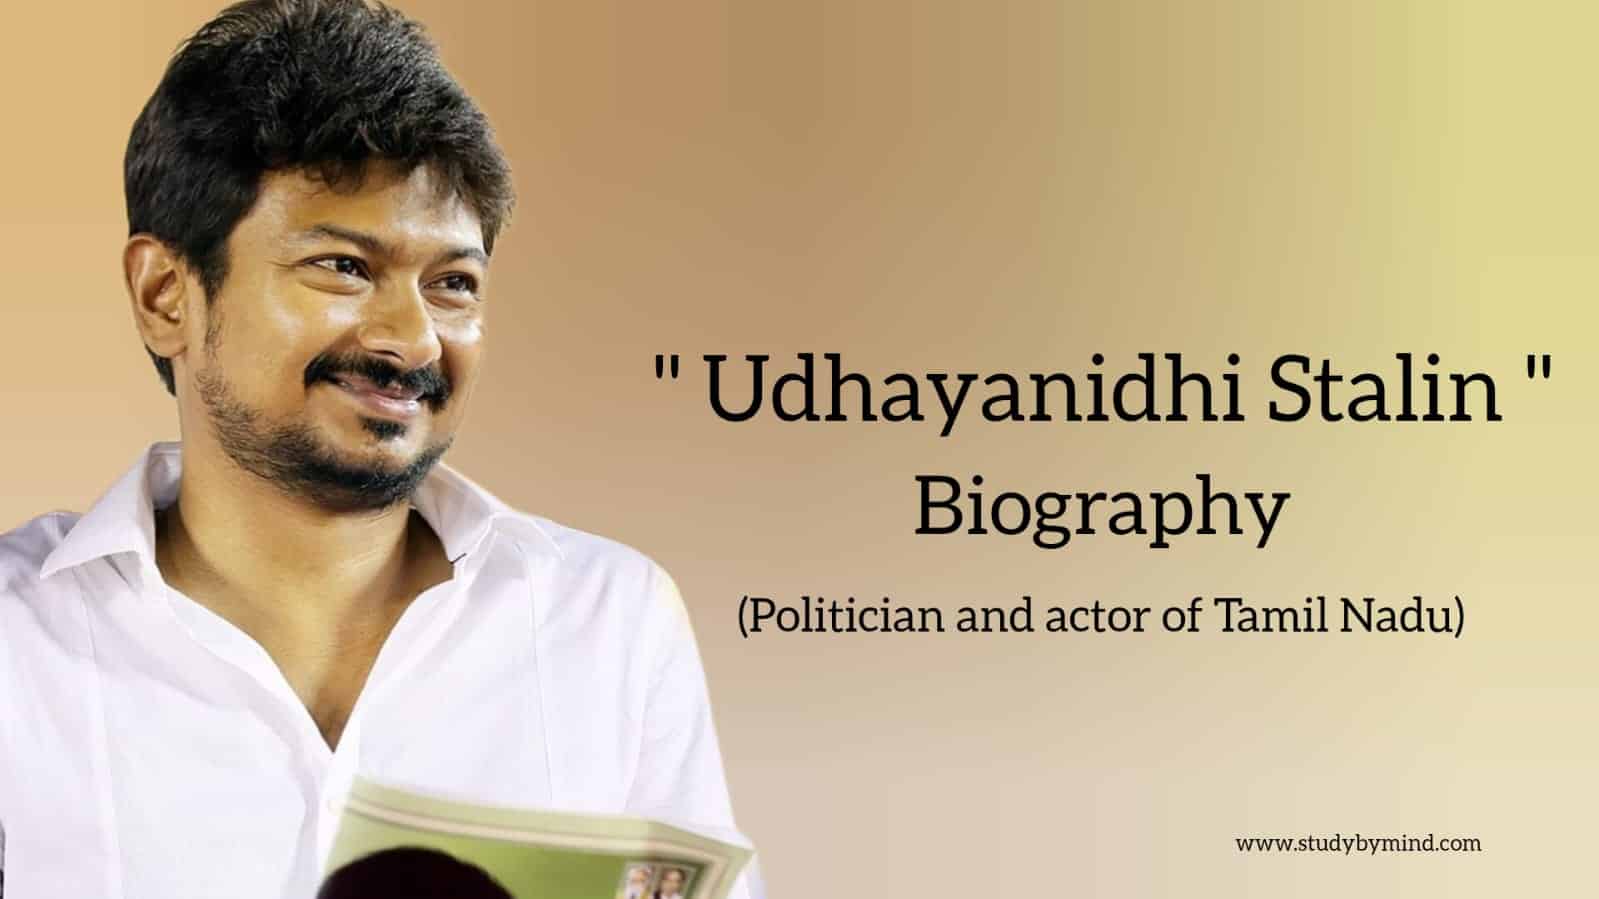 You are currently viewing Udhayanidhi stalin biography in english (Indian Politician)